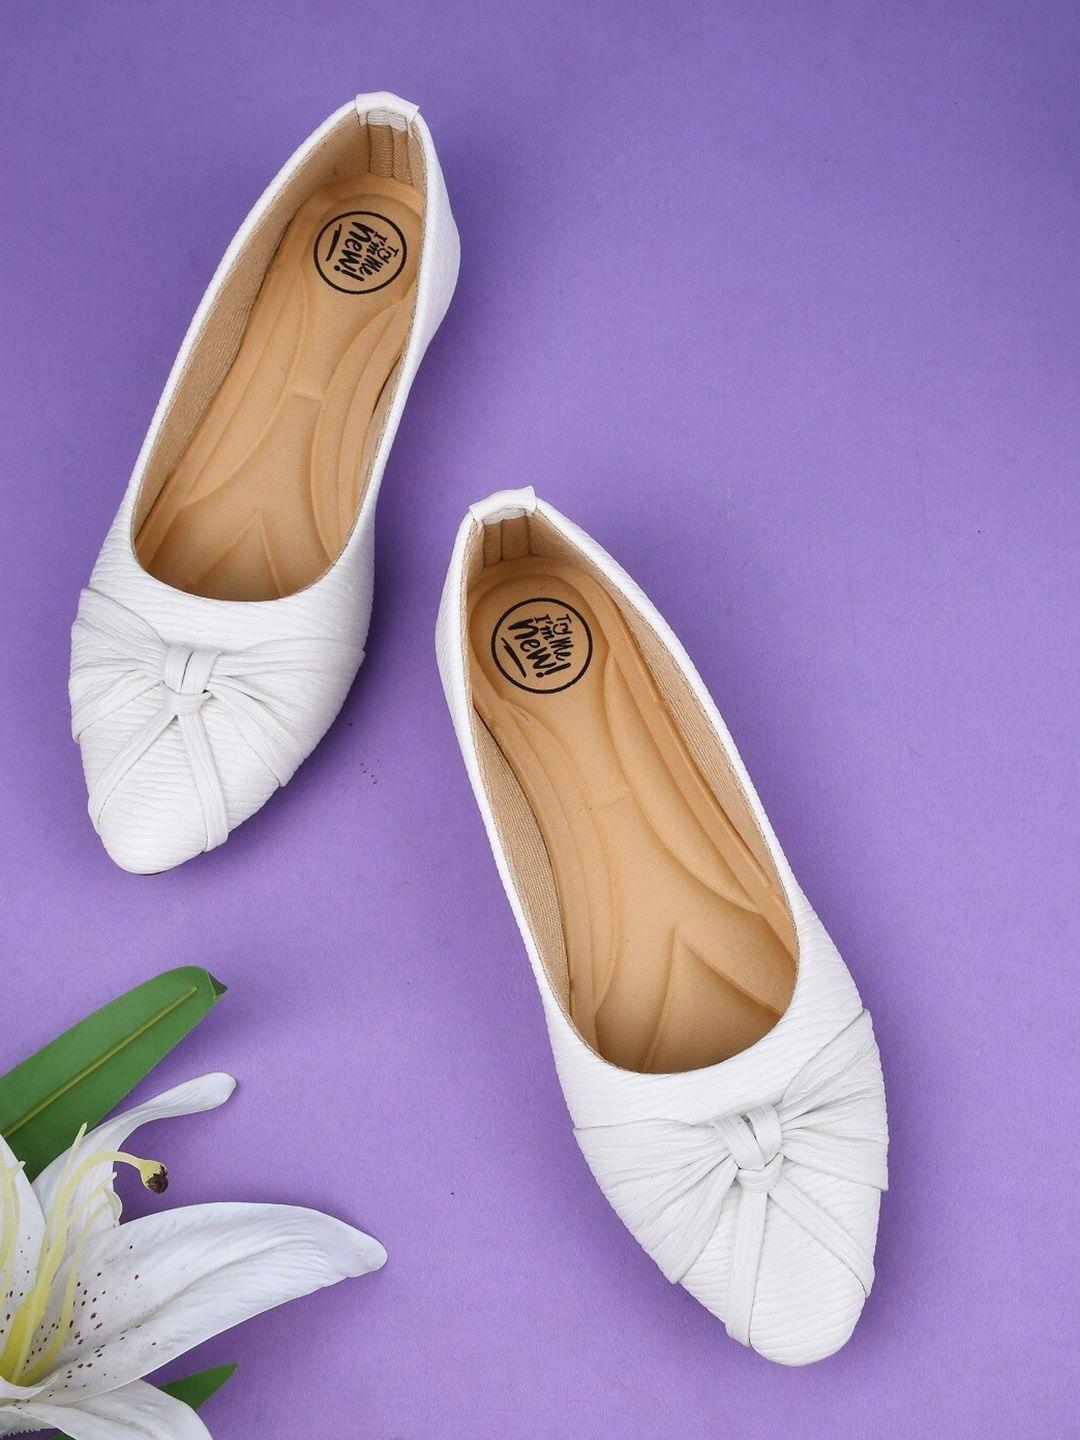 try me women white ethnic ballerinas with bows flats